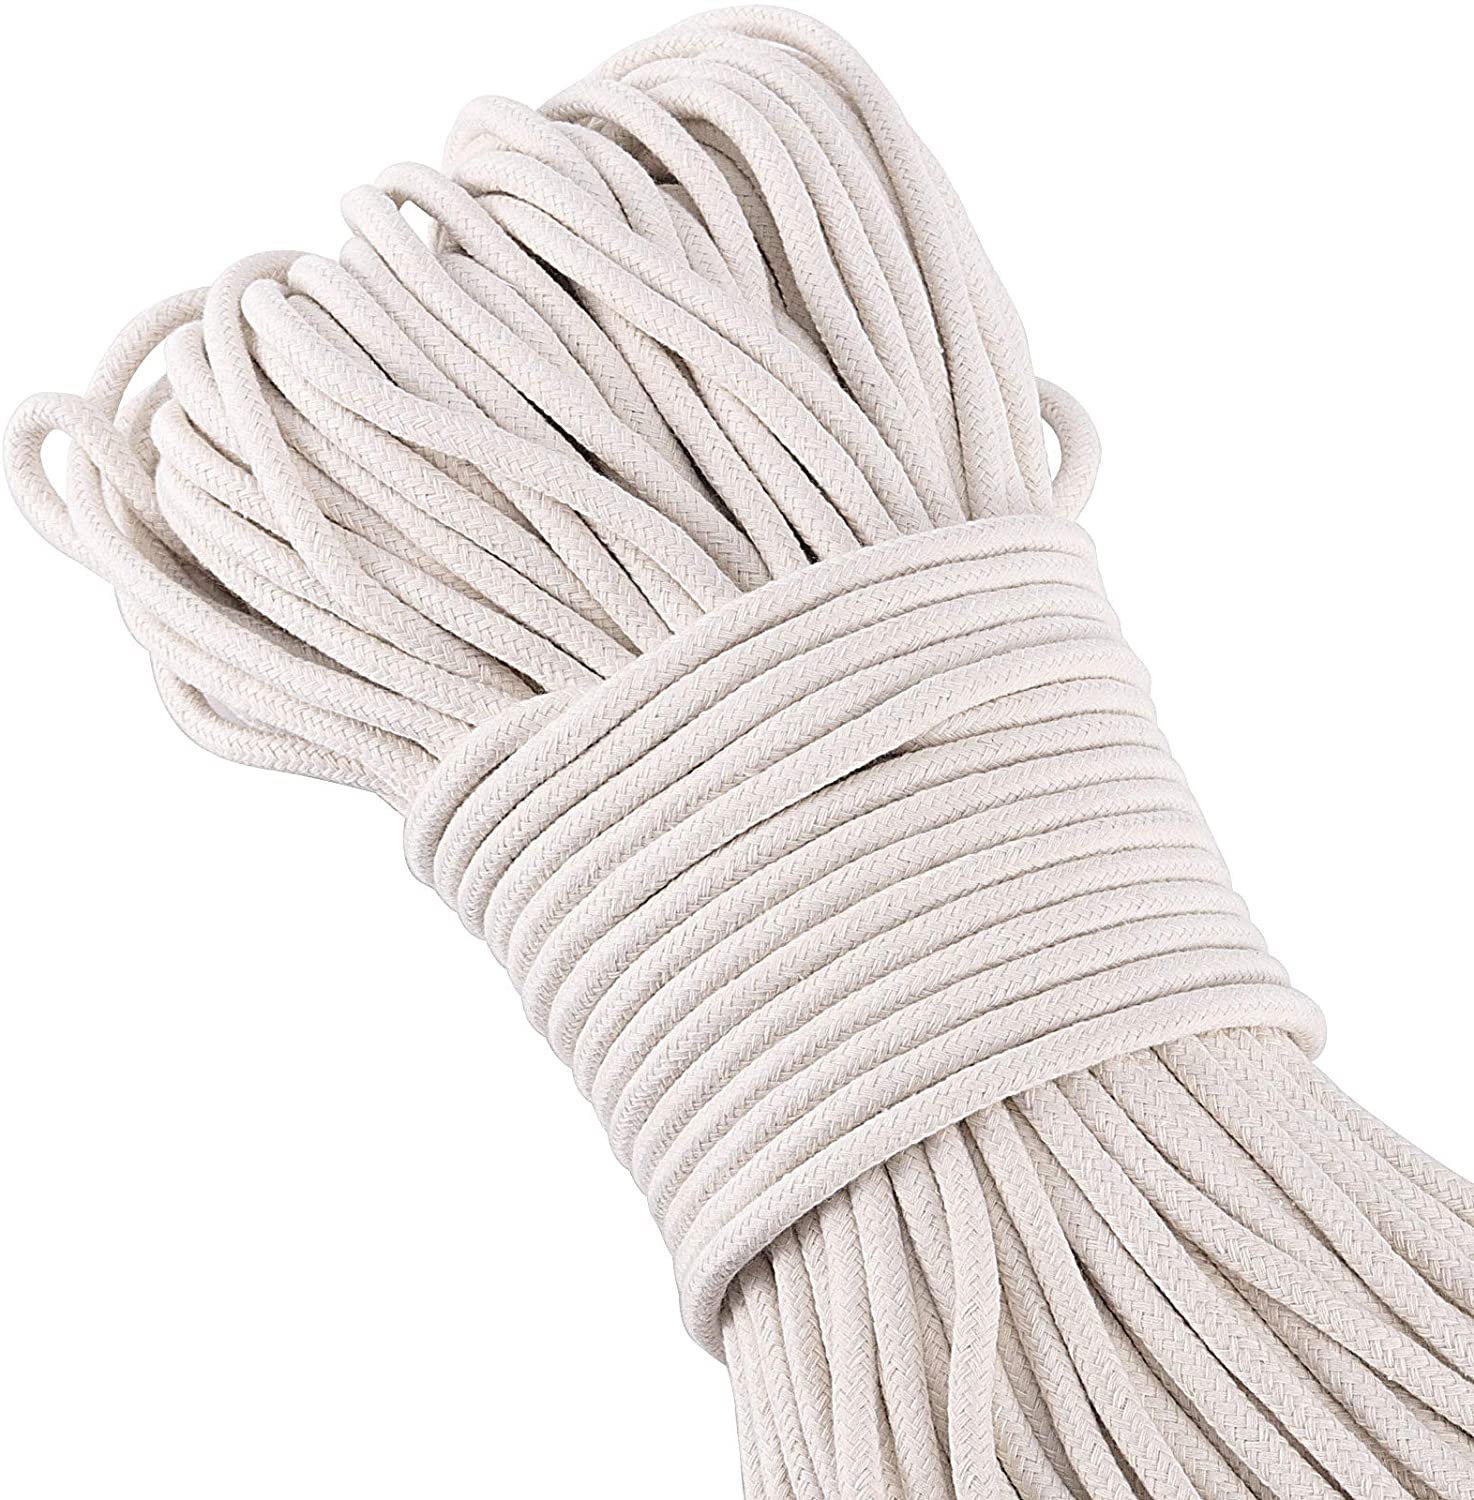 ZEONHAK 1/4 Inch Cotton Rope, Clothesline Rope Cord, 328 Ft All Purpose  Braided Cotton Rope, Off-White 